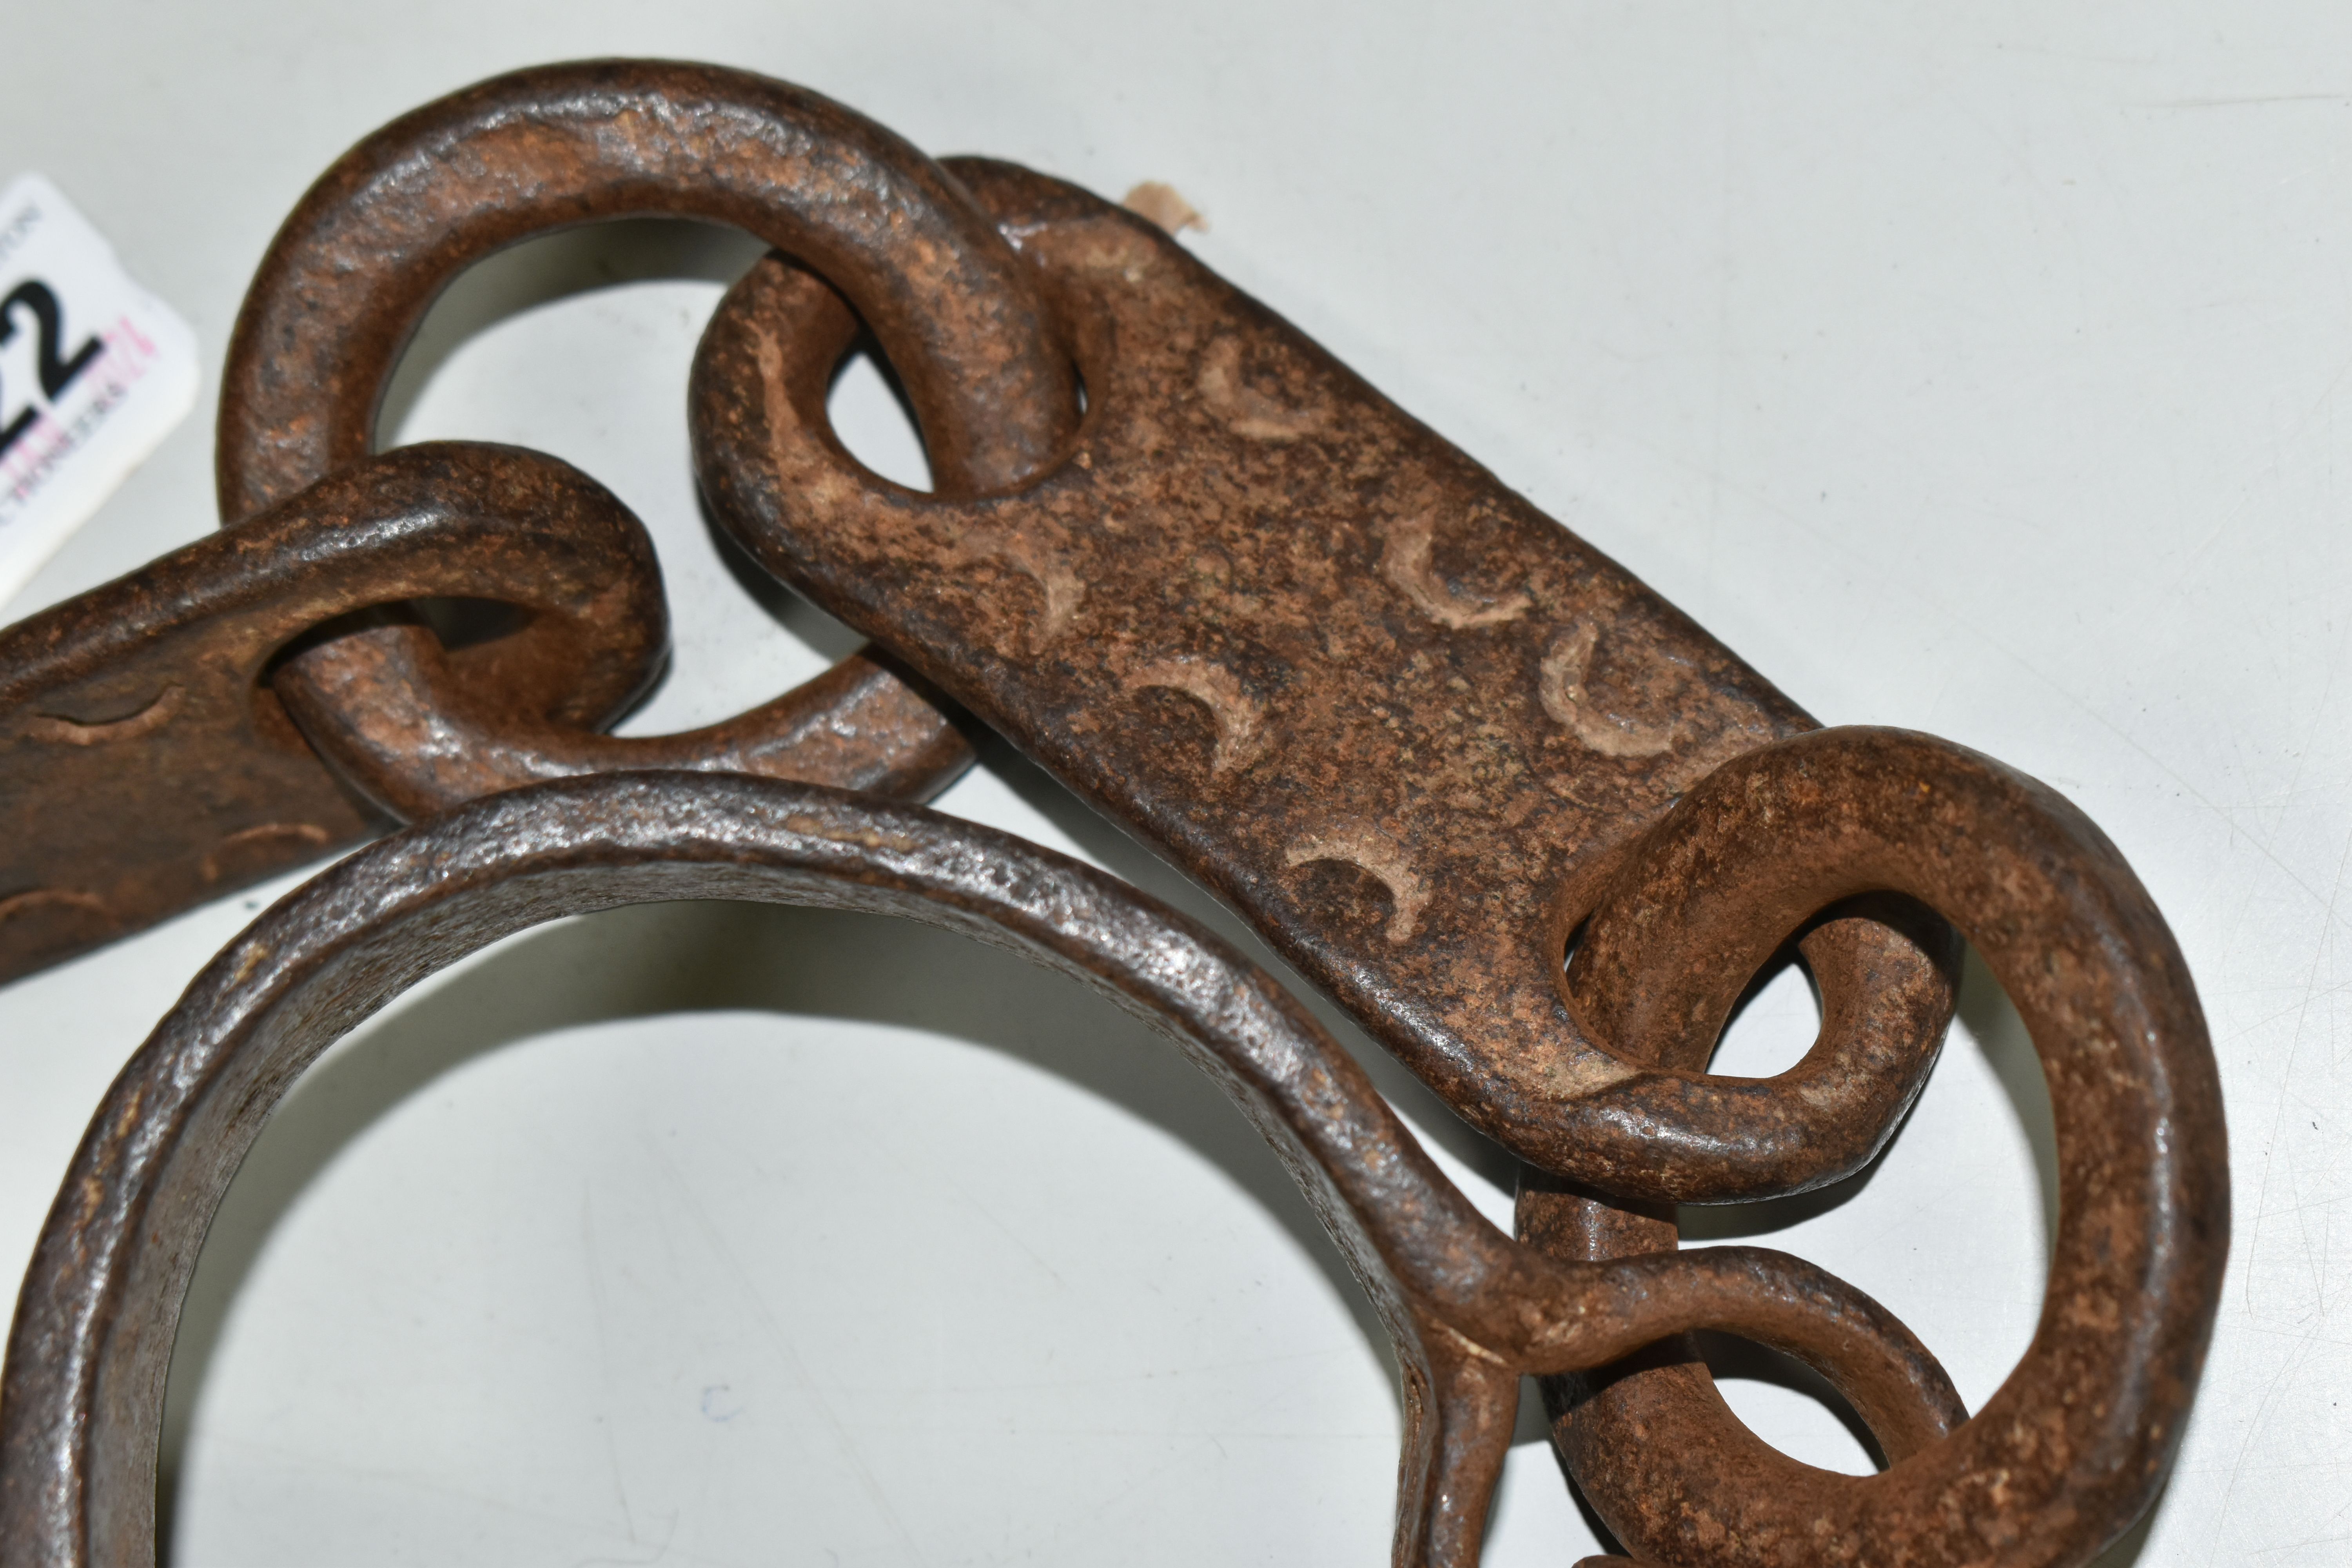 19TH CENTURY WROUGHT IRON SHACKLES, crude decoration to the flat links, lacking lock mechanism and - Image 2 of 4